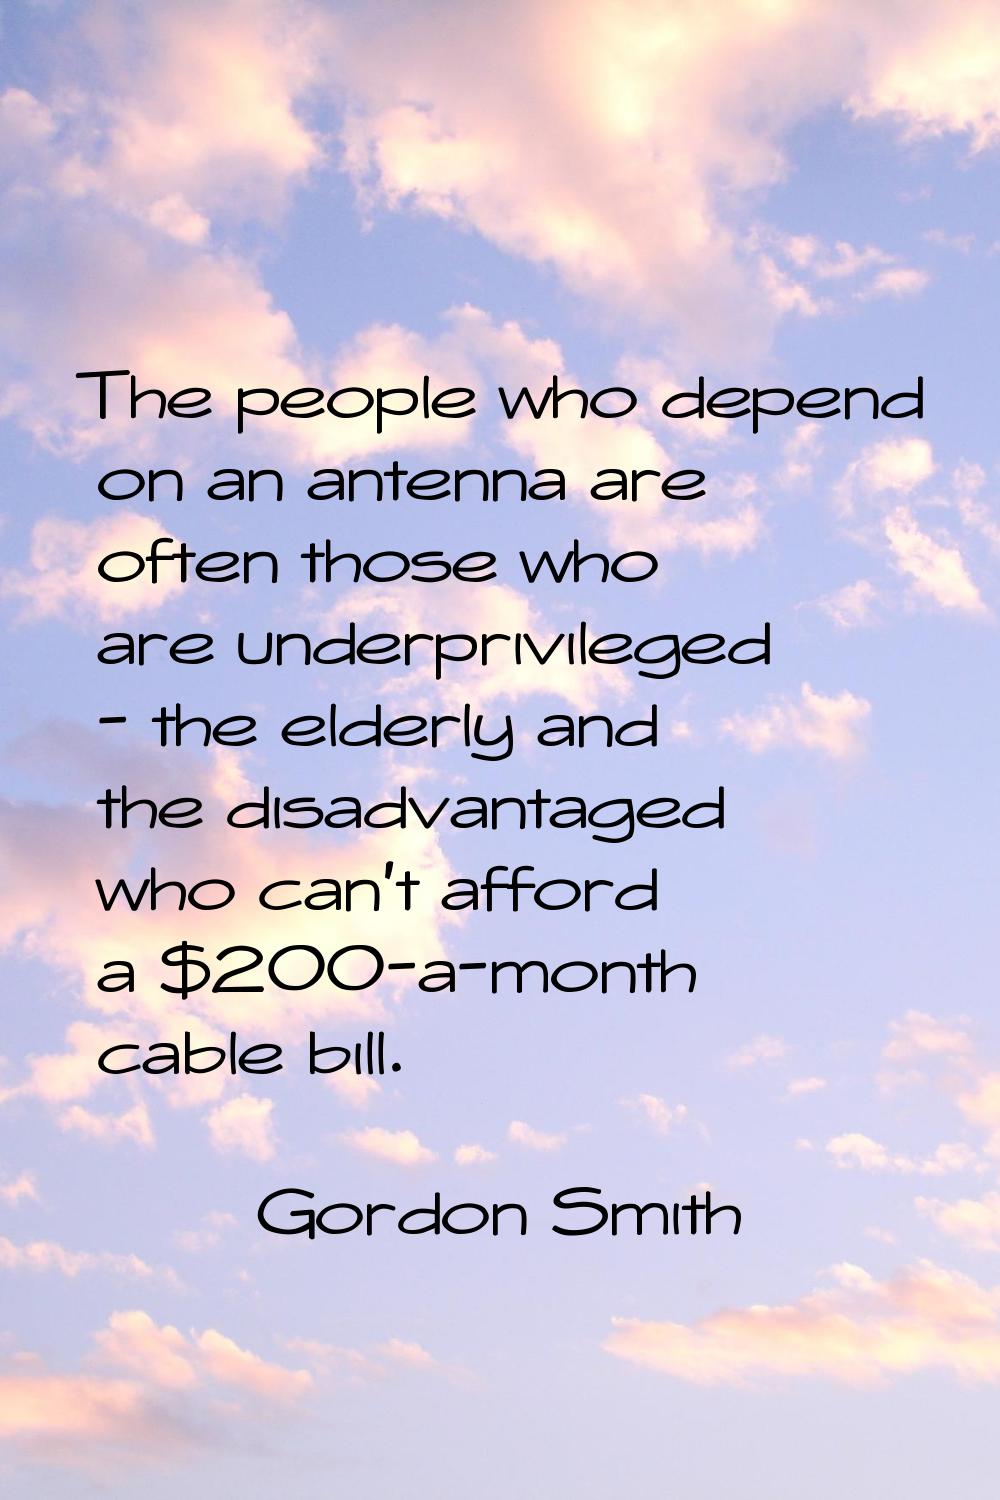 The people who depend on an antenna are often those who are underprivileged - the elderly and the d